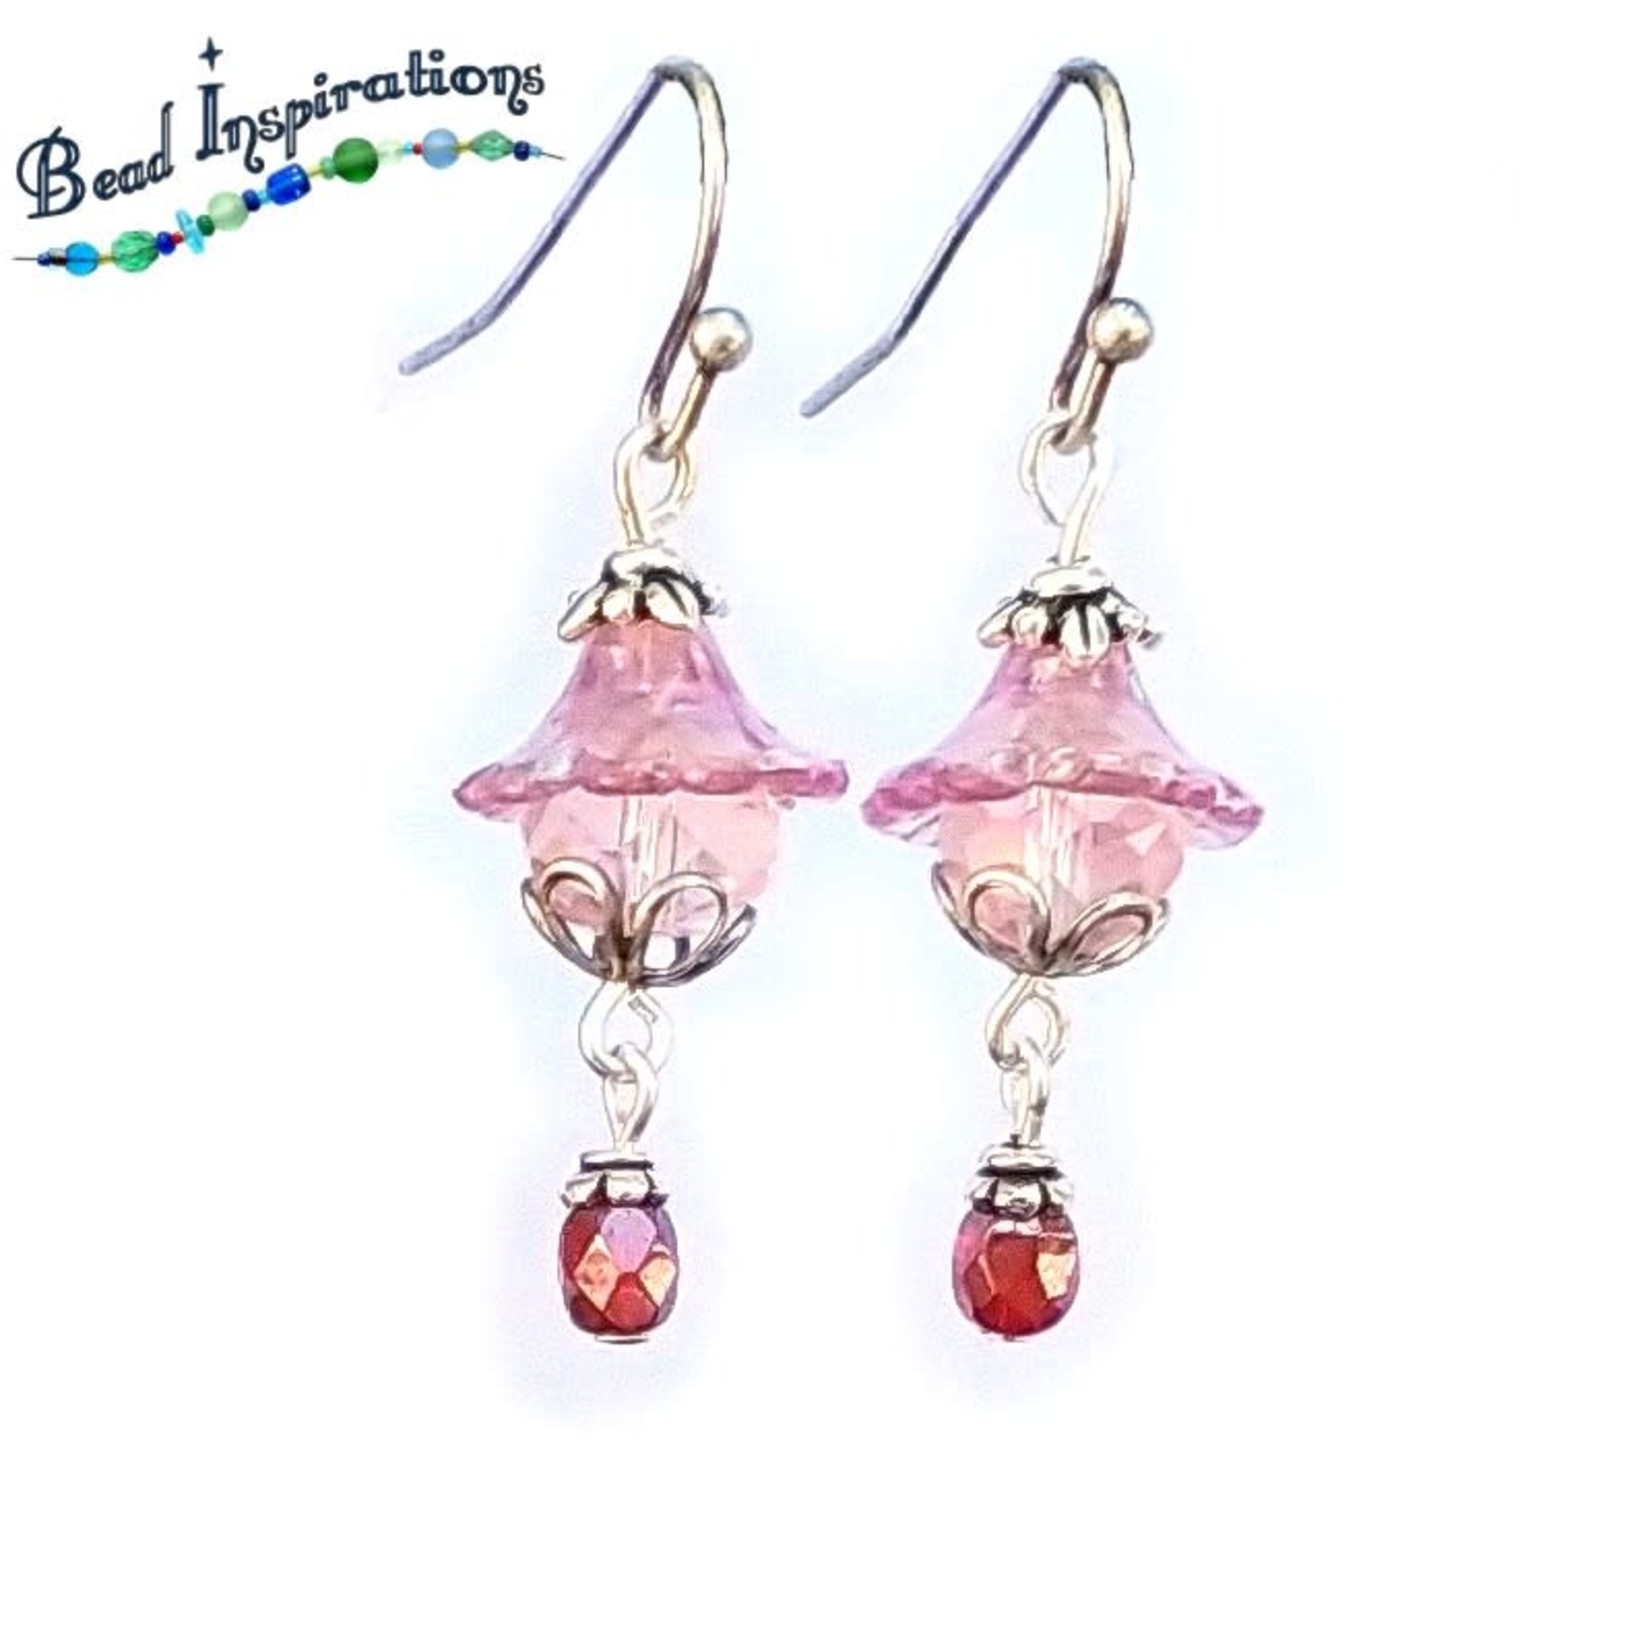 Bead Inspirations Spring Blossom Purple/Pink Earrings